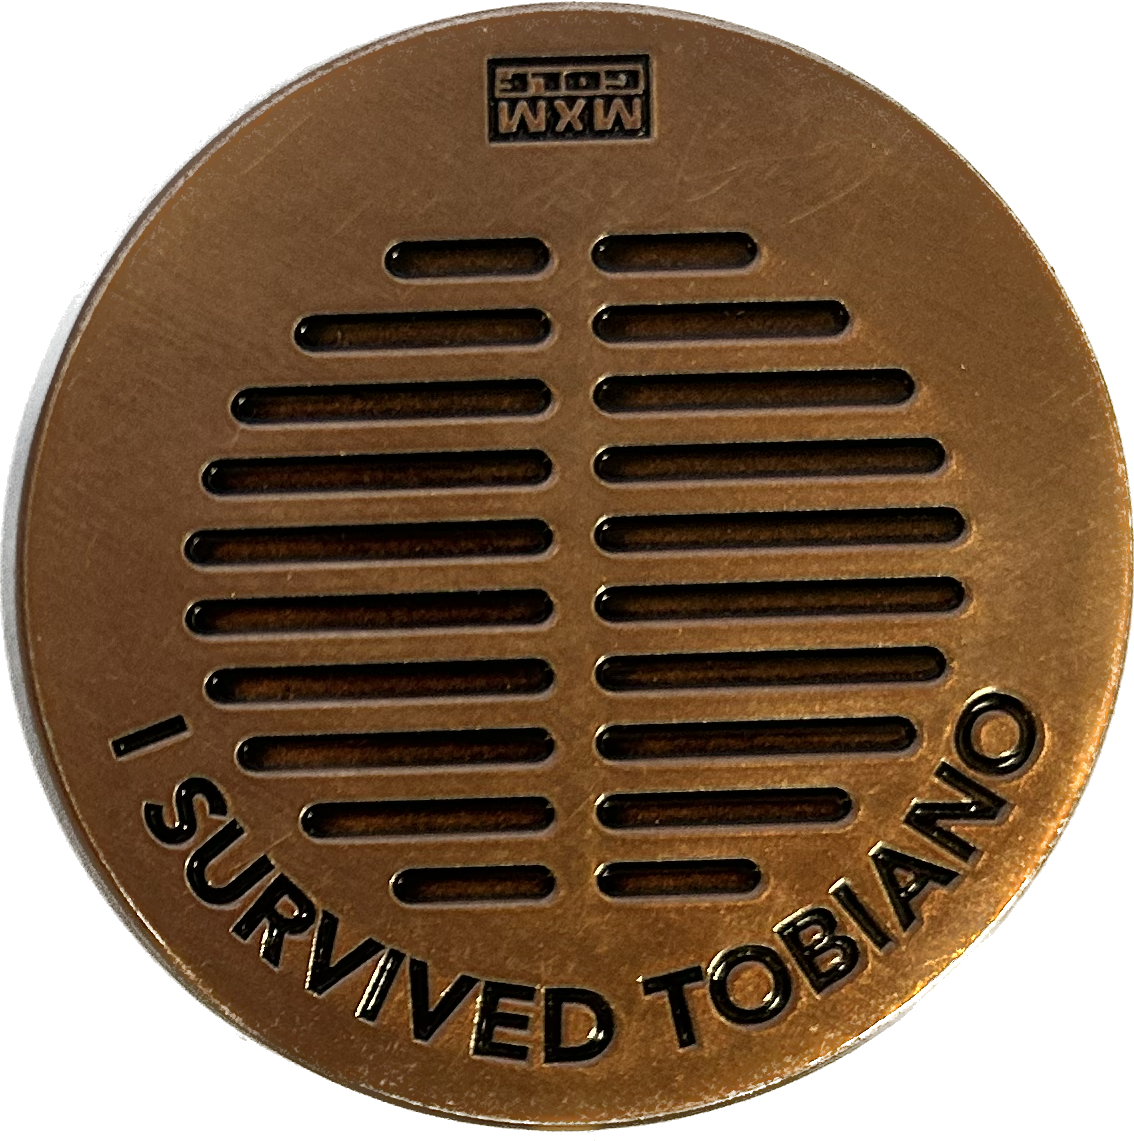 Tobiano Forged Ball Marker